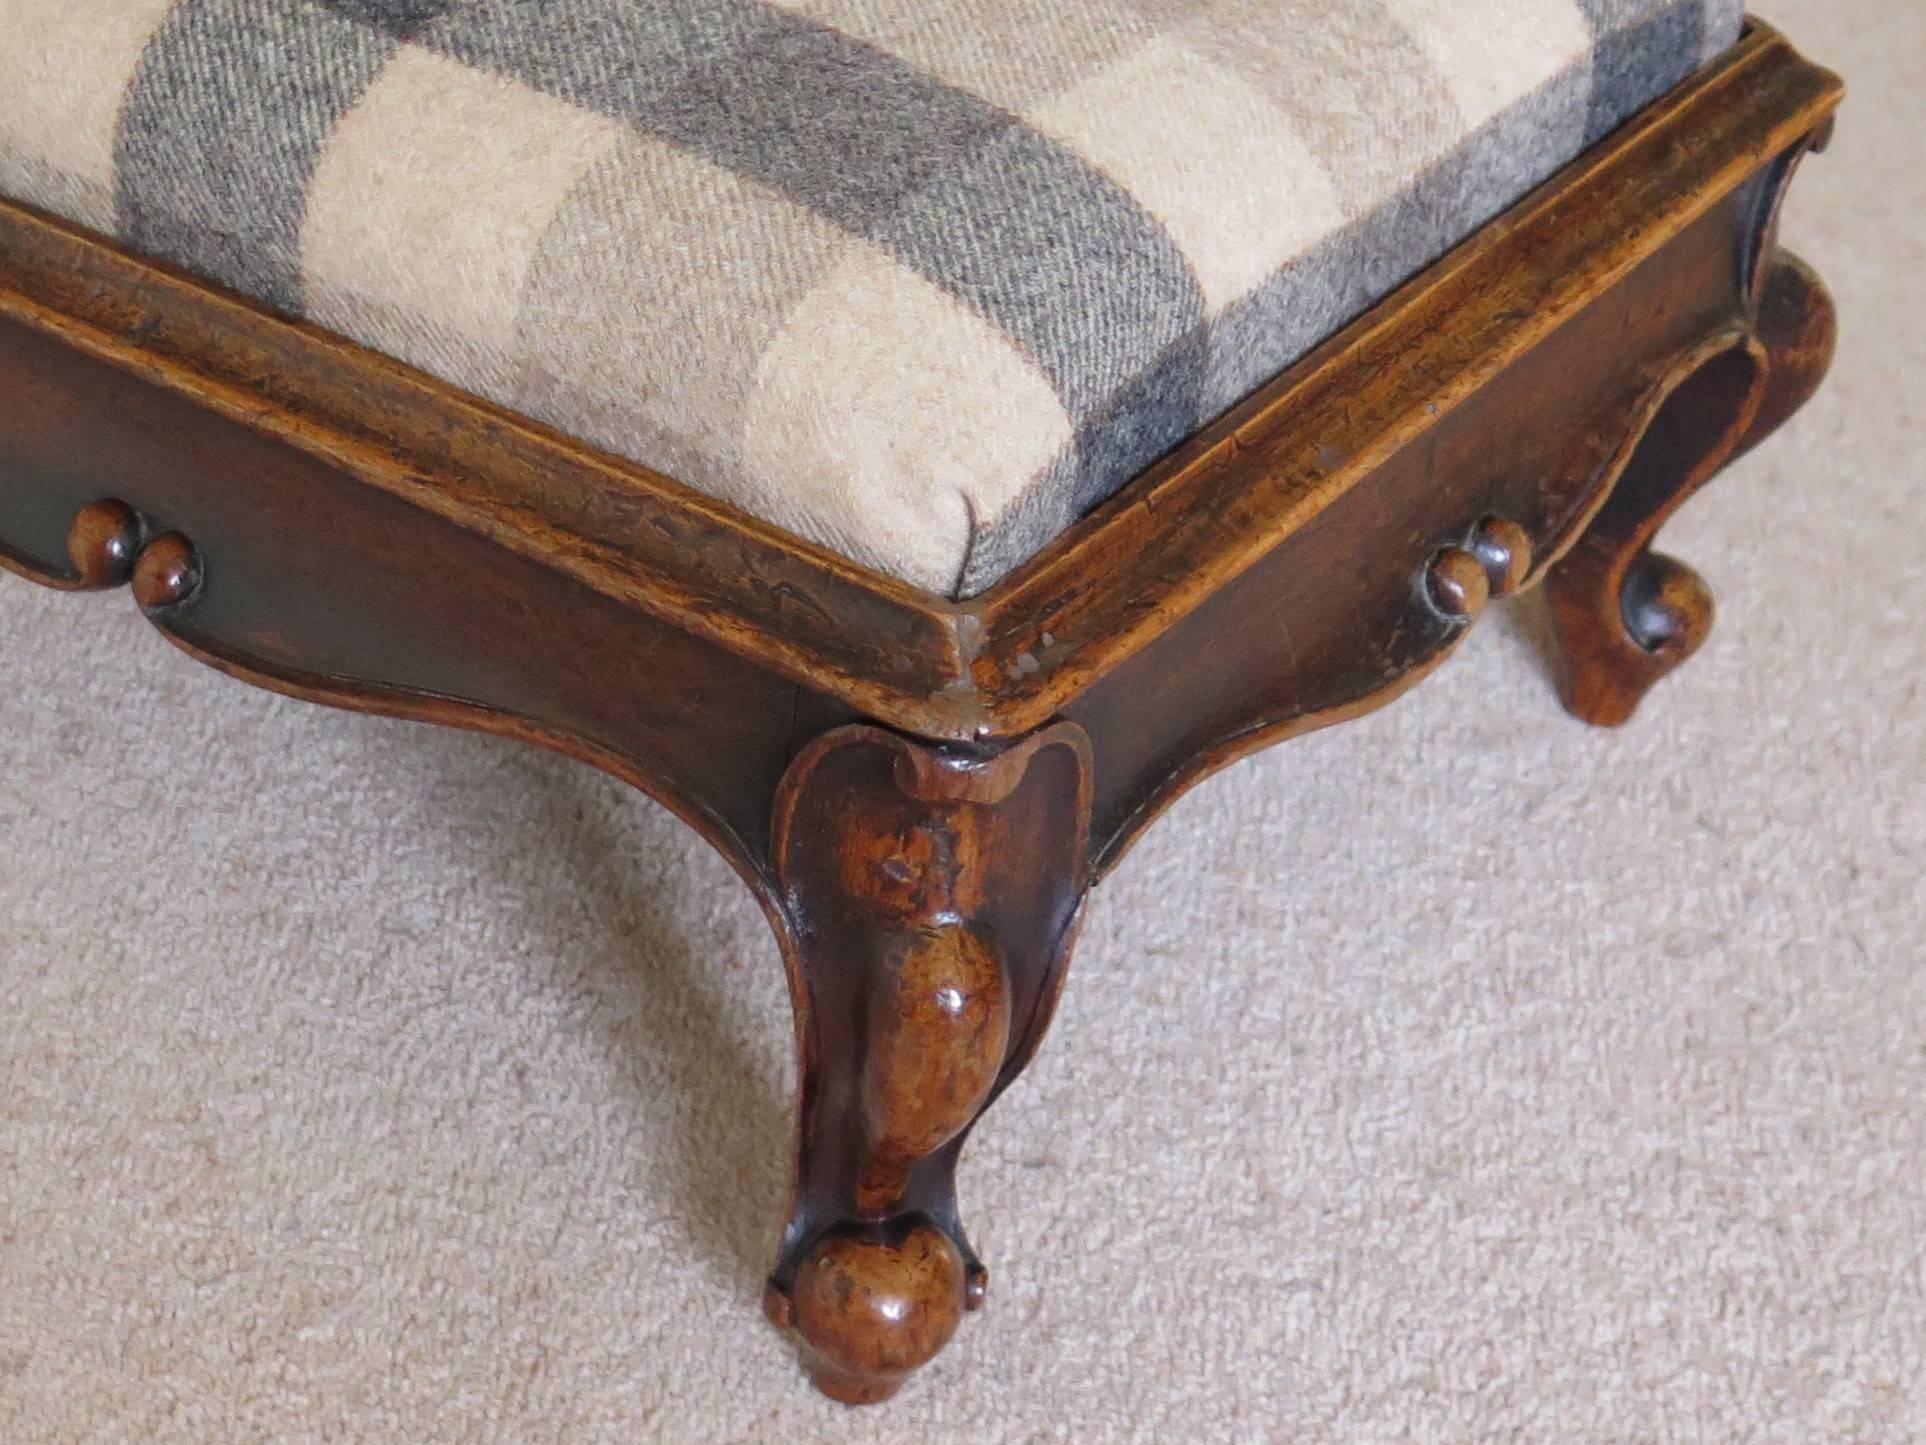 Hand-Crafted Mid-Victorian Mahogany Large Footstool Cabriole Legs Wool Mix Top, circa 1850